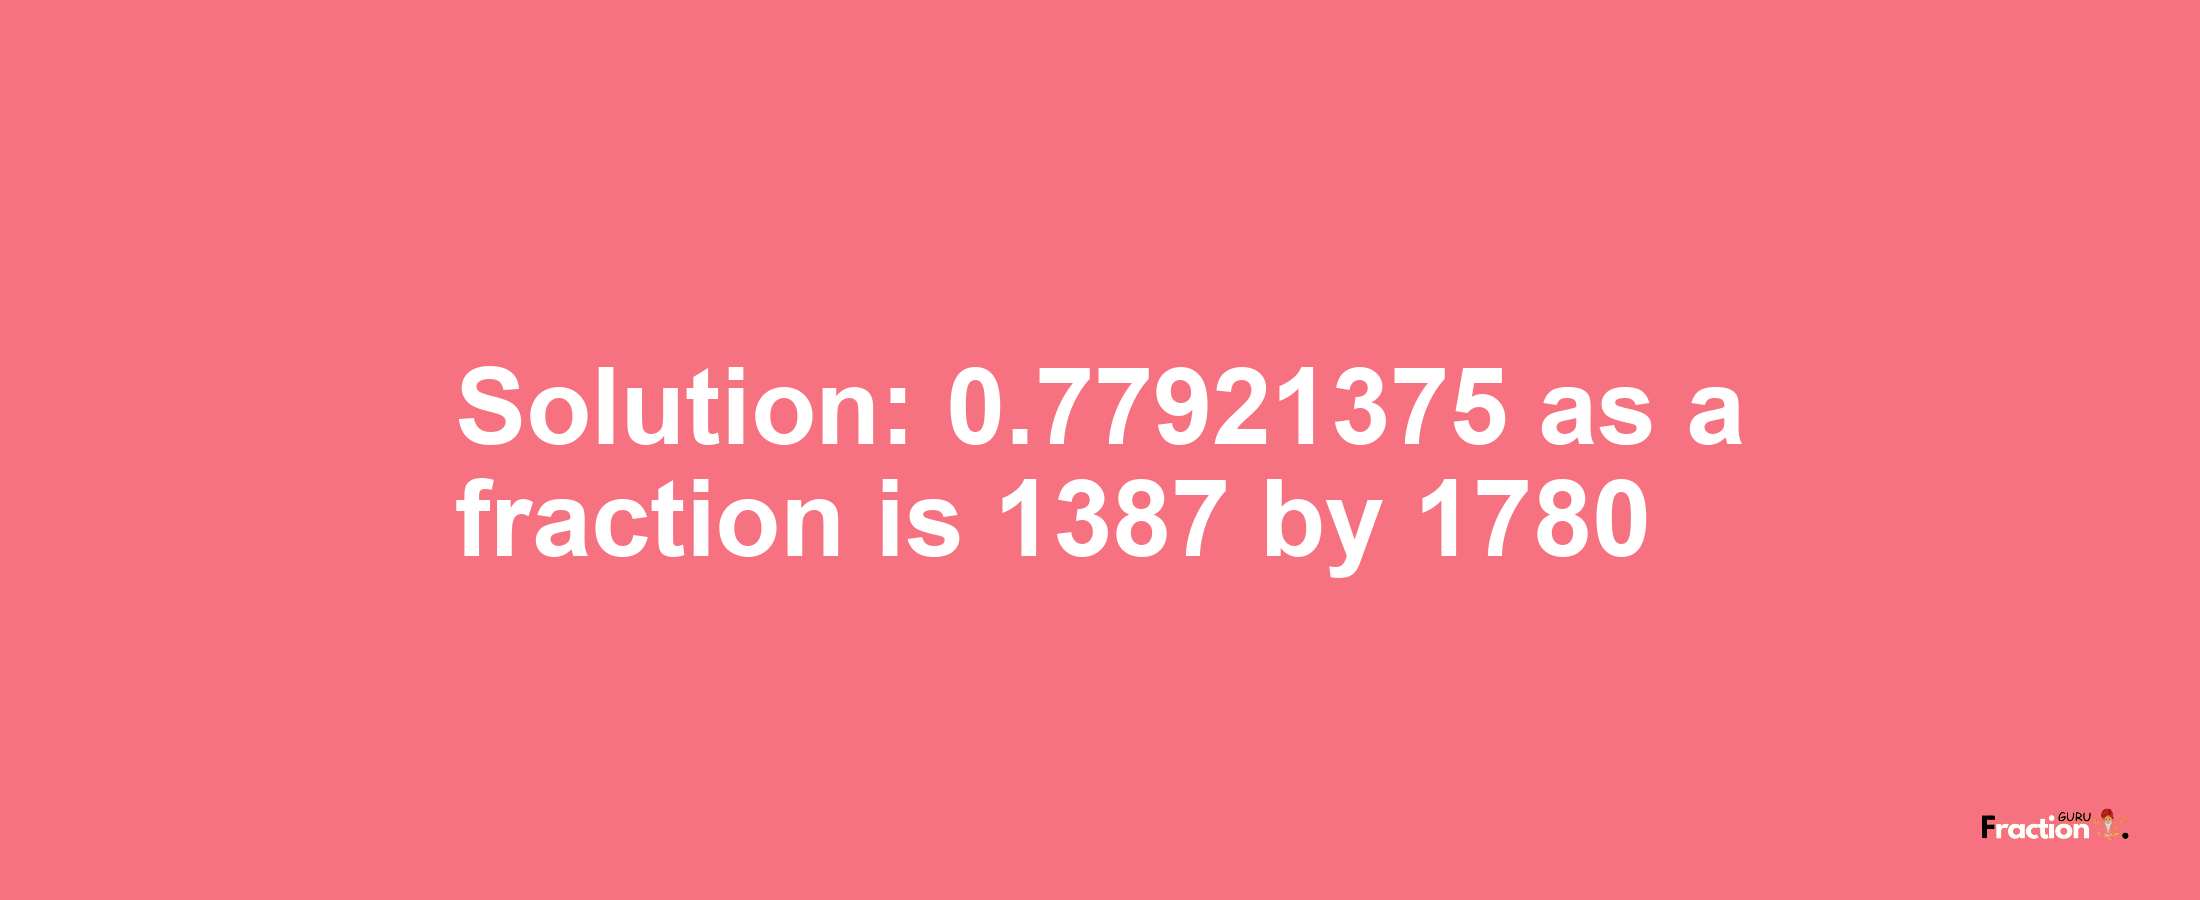 Solution:0.77921375 as a fraction is 1387/1780